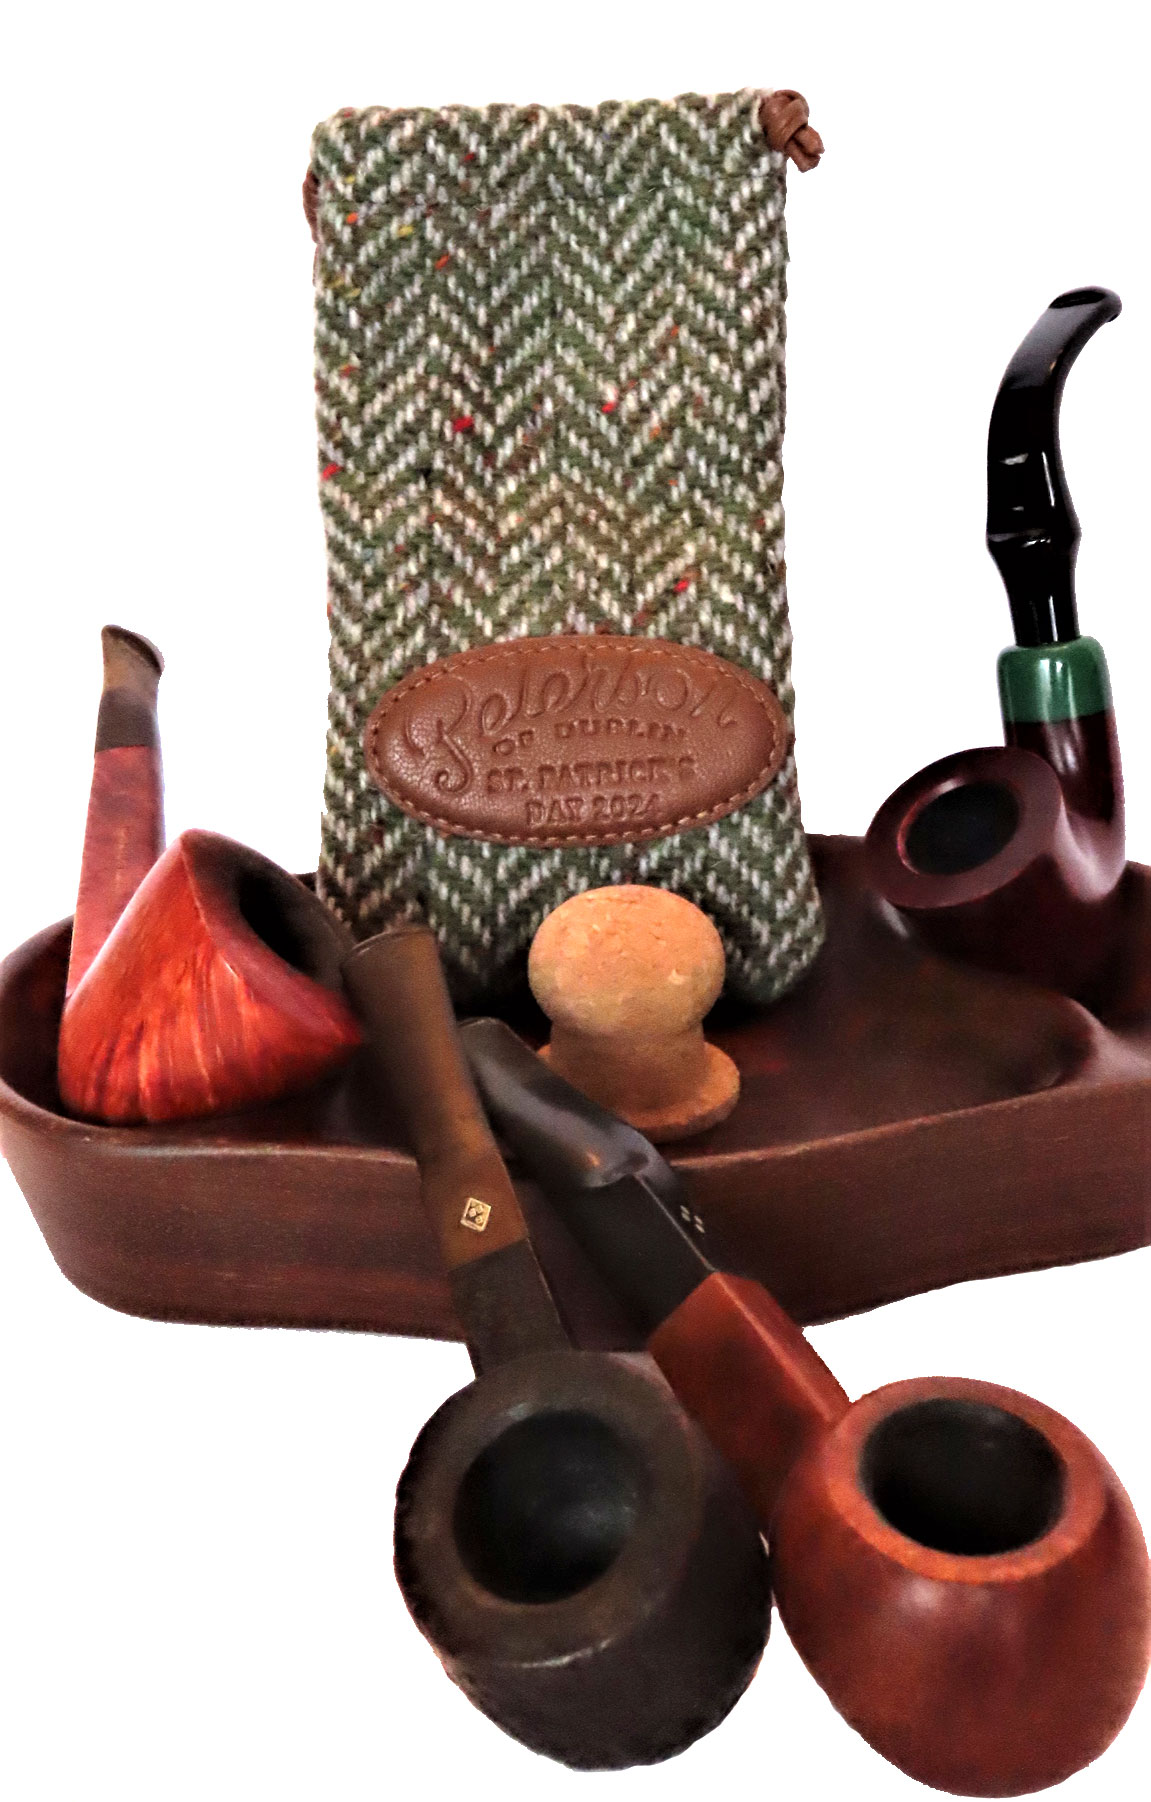 Old members of the pipe herd (bottom left) and latest addition, Peterson St. Patrick's Day St. Patrick’s Day pipe at right. The Pete is adorned with an Irish green cap on the Peterson 305 Calabash, one of the famous Dublin pipe manufacturer’s most popular shapes. (Photo: Fred Brown)